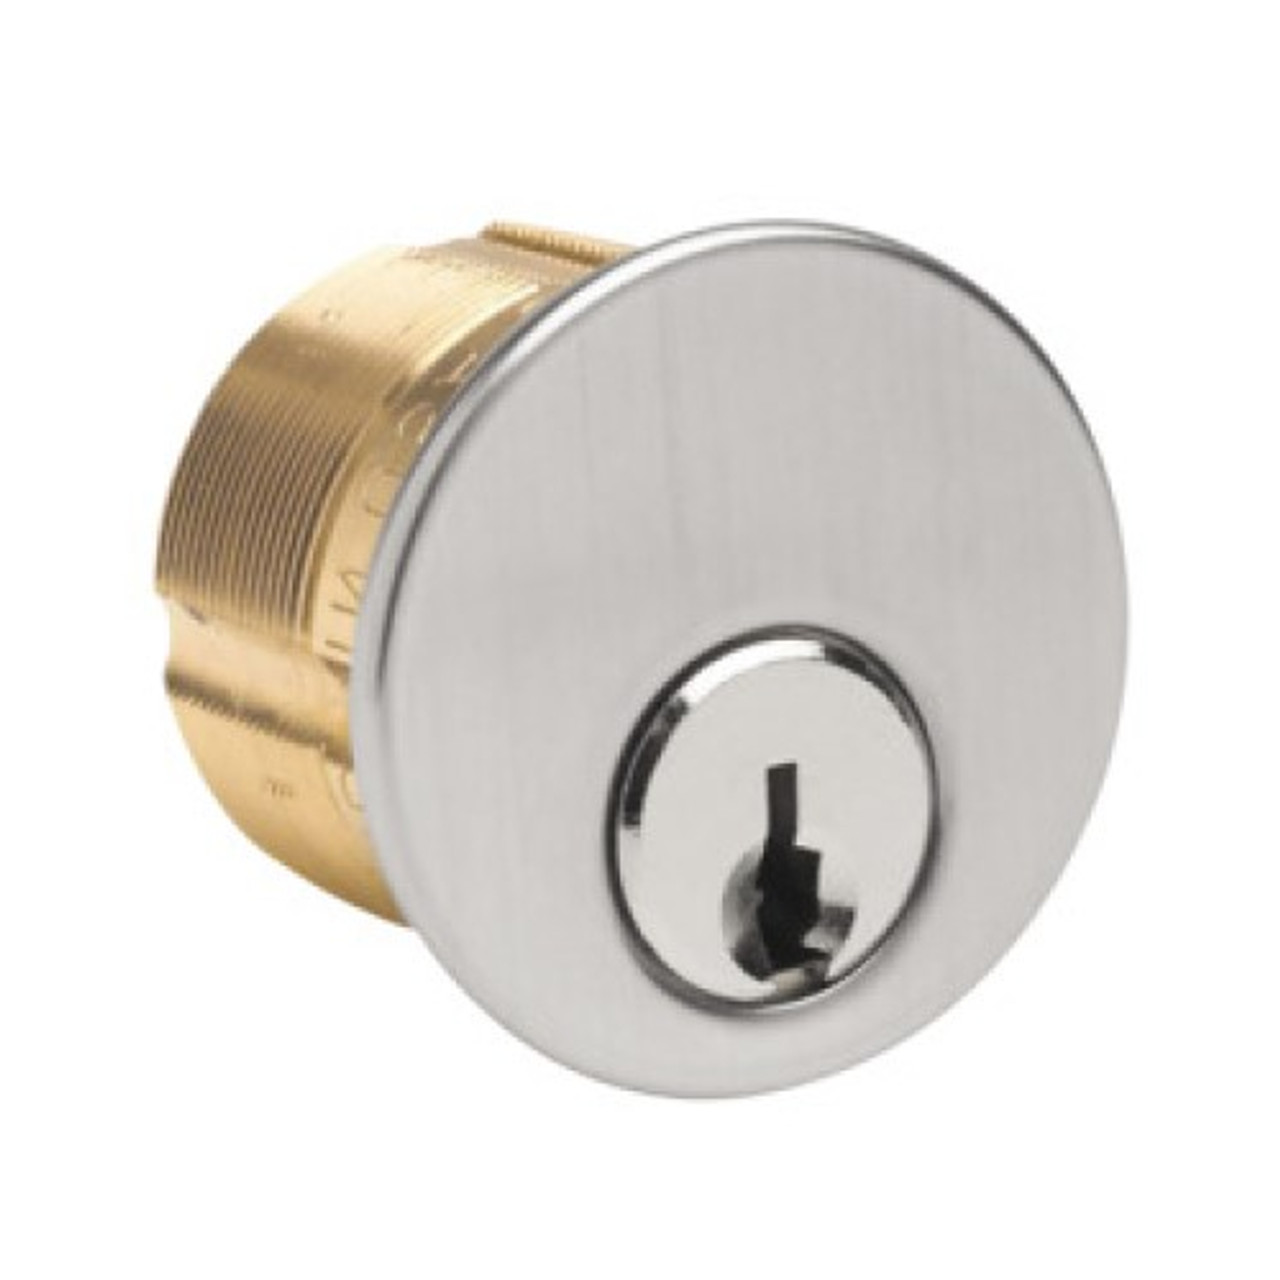 Ilco 7186GB1 Mortise Cylinder 1-1/8"